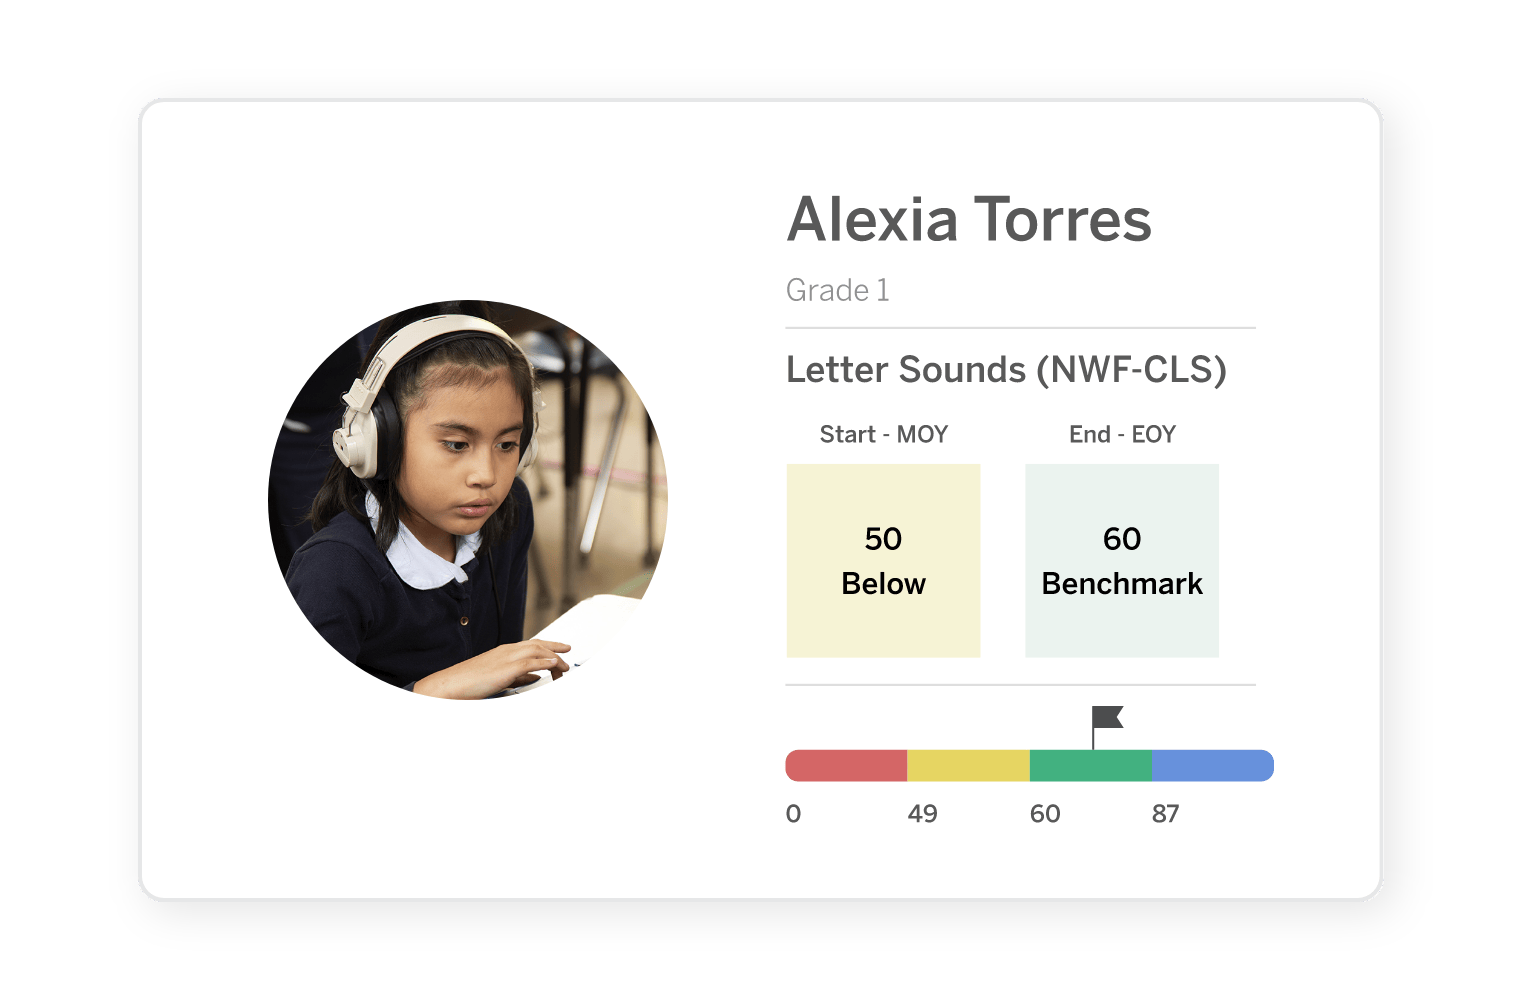 Young girl wearing headphones, using a tablet in class, with a display screen showing her academic progress in letter sounds through the Amplify mCLASS reading assessment.